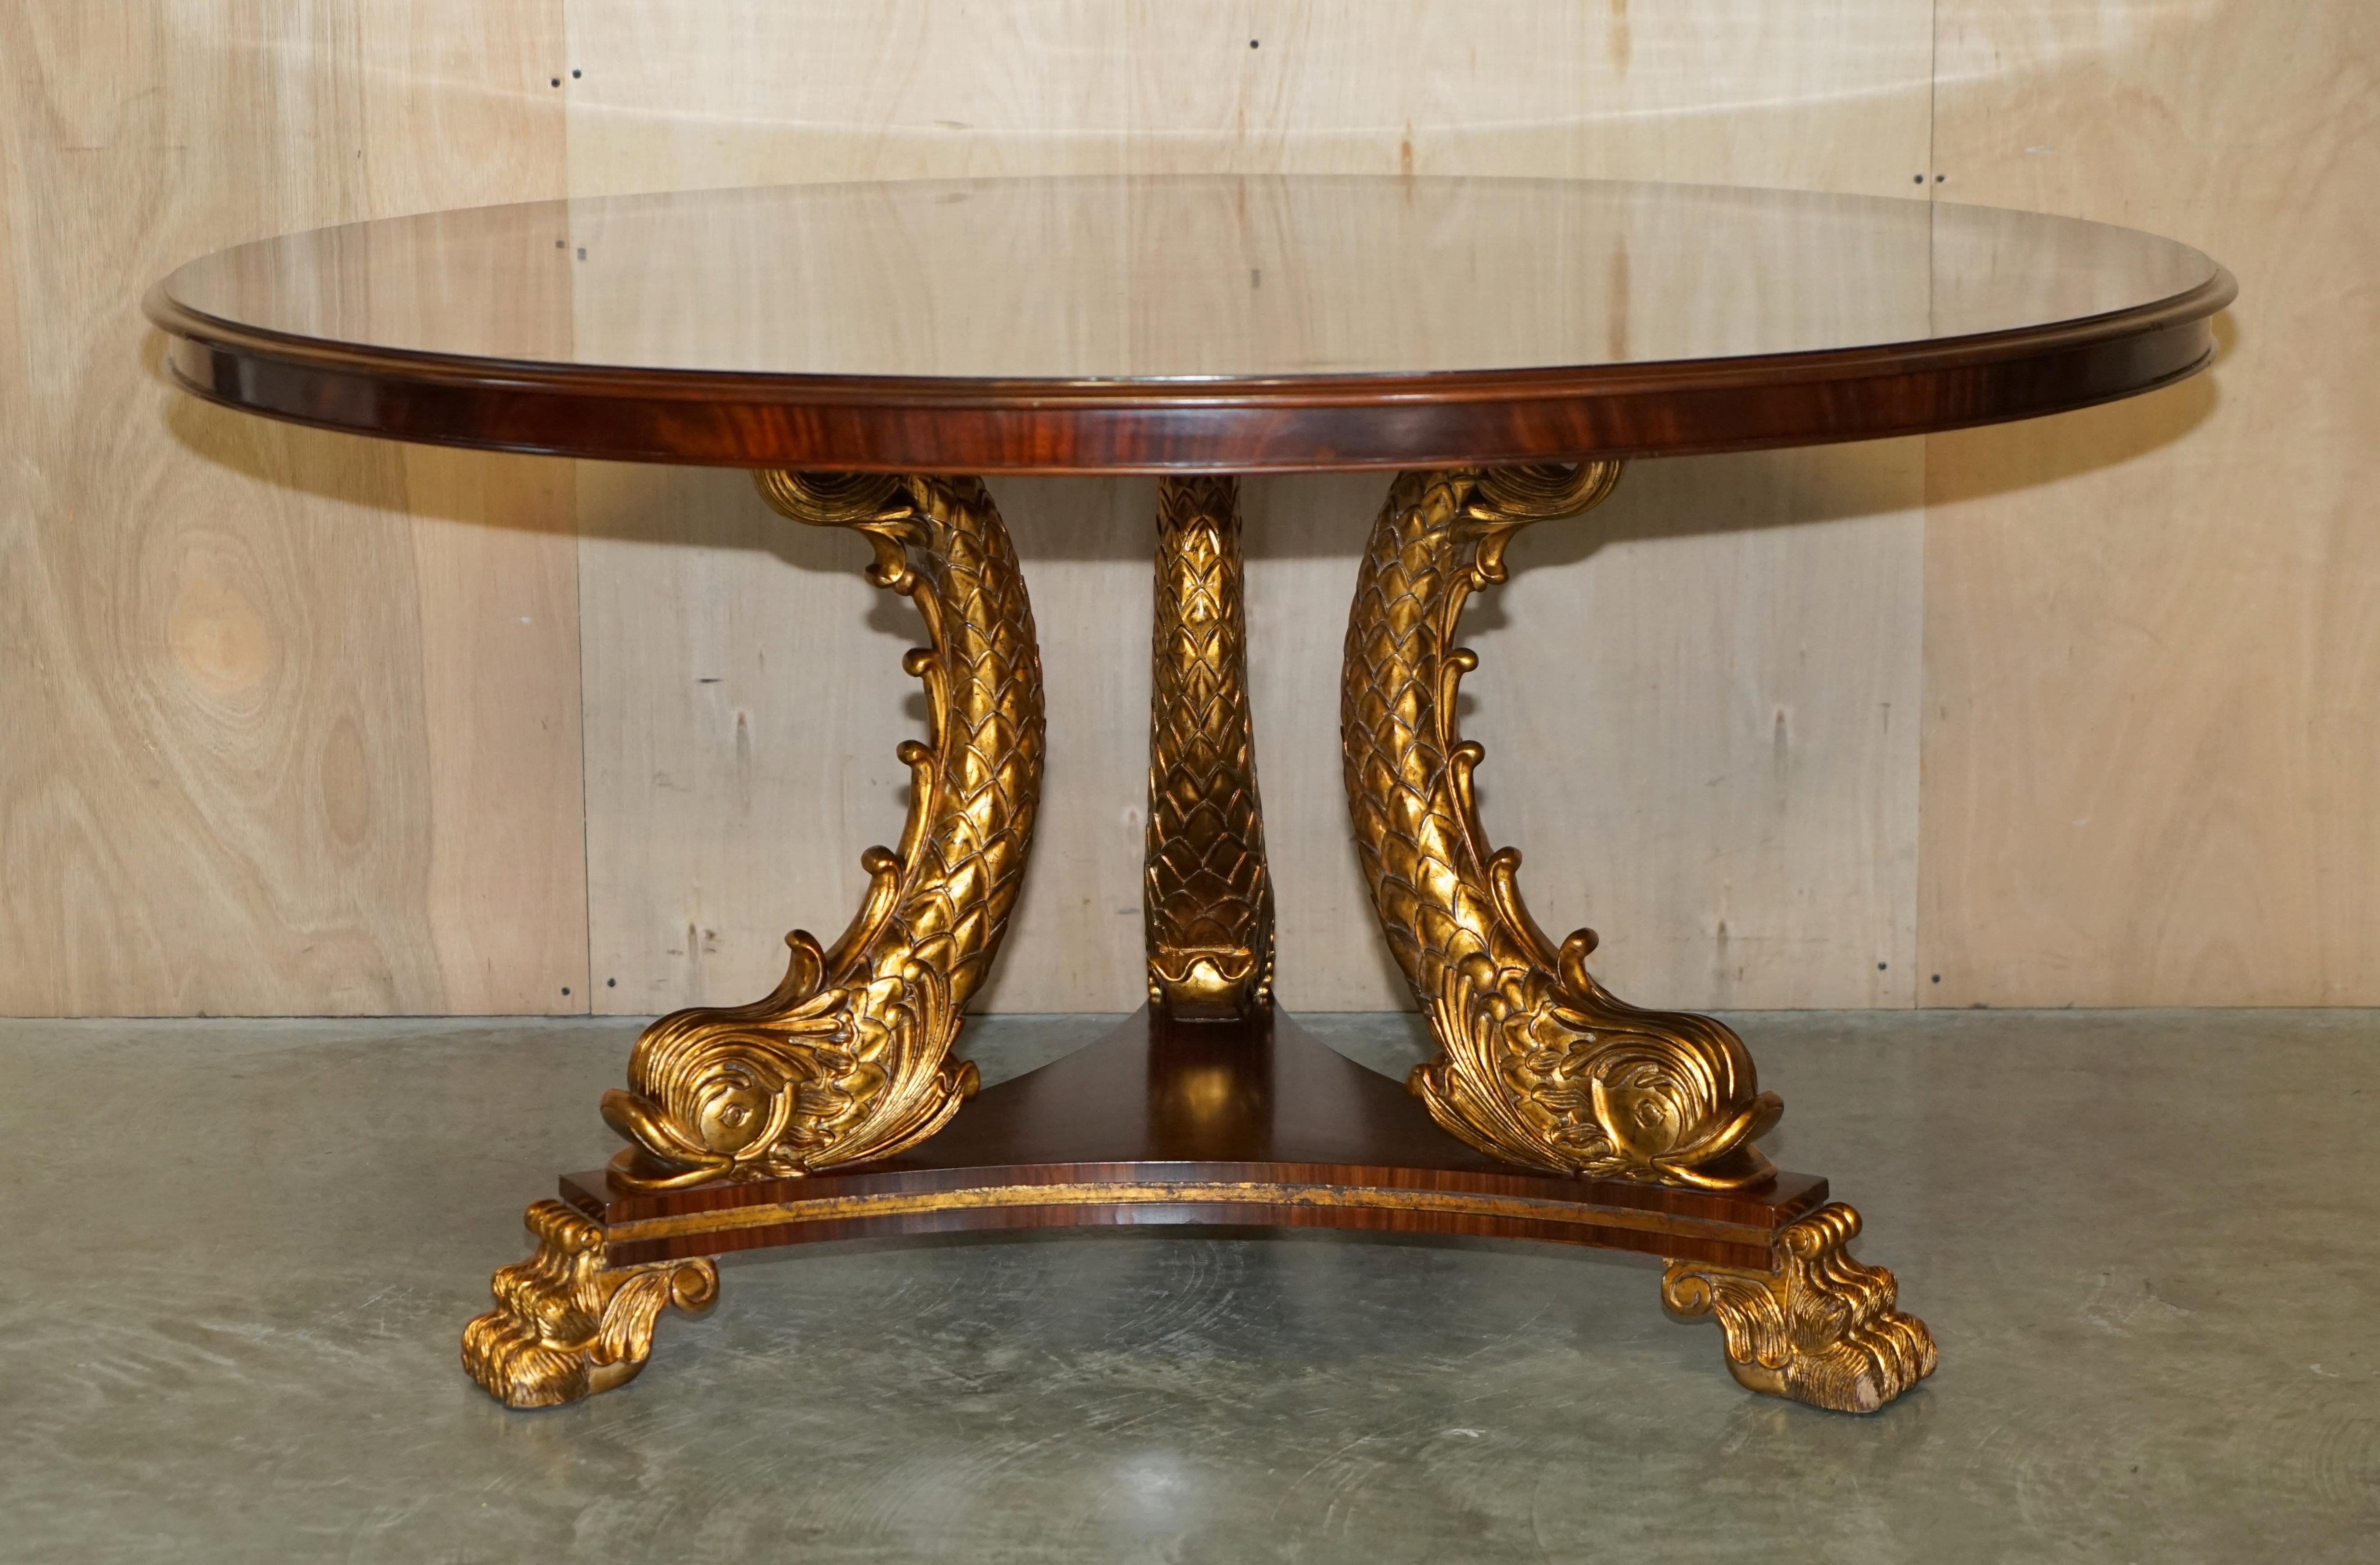 We are delighted to offer for sale this absolutely exquisite, Regency style, large round dining or huge centre table with Dolphin base that has been beautifully gilded and flamed mahogany top 

Please note the delivery fee listed is just a guide,